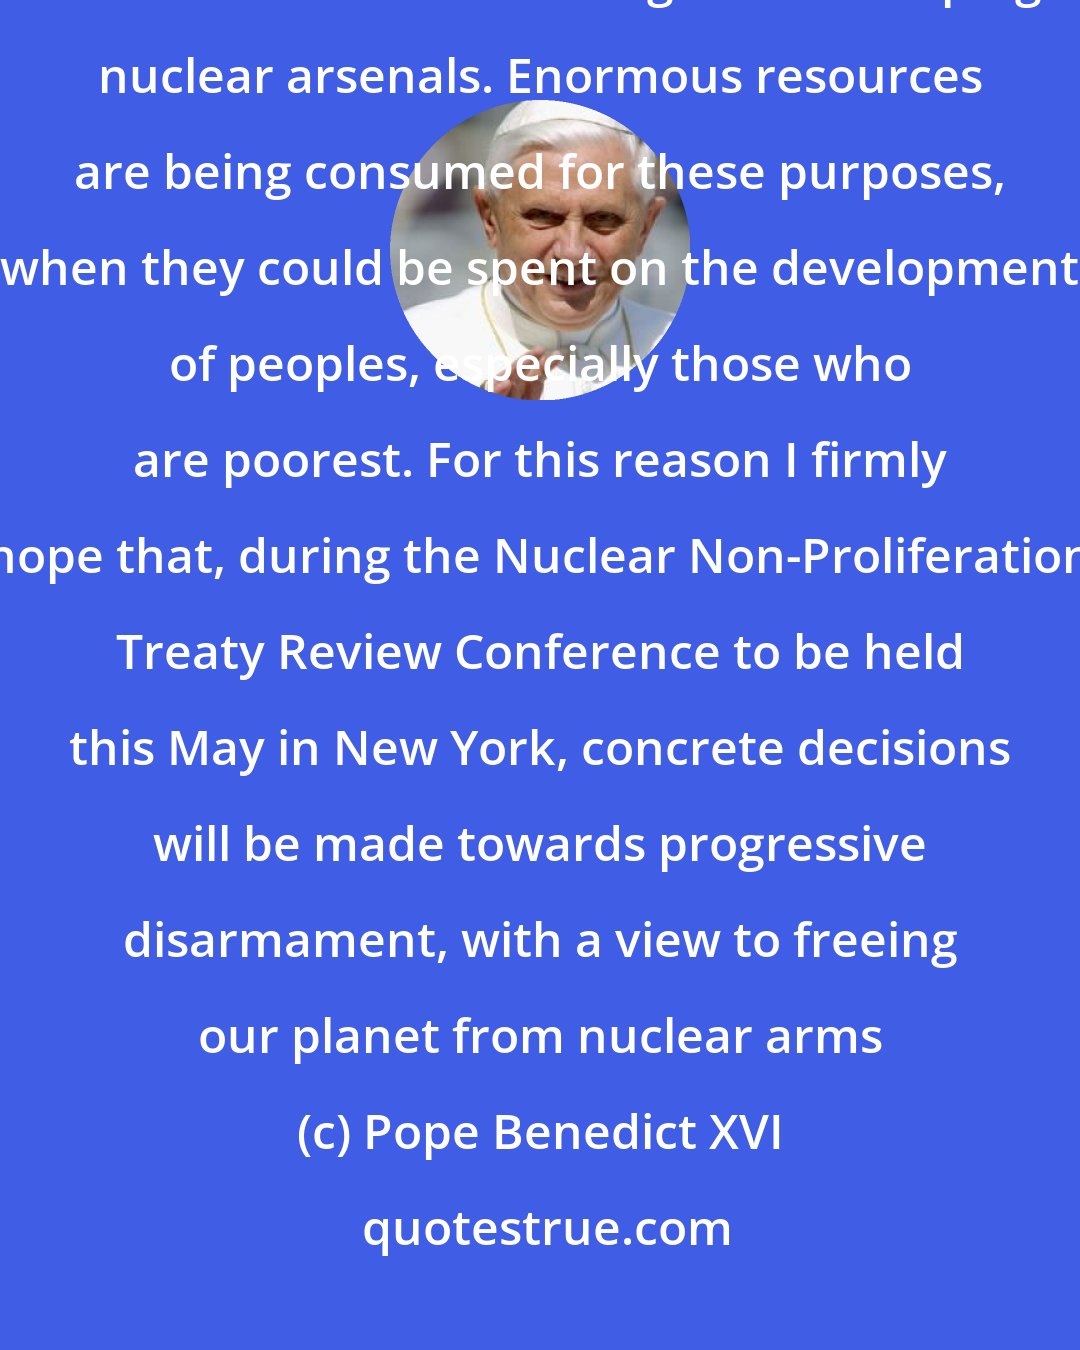 Pope Benedict XVI: One of the most serious [challenges] is increased military spending and the cost of maintaining and developing nuclear arsenals. Enormous resources are being consumed for these purposes, when they could be spent on the development of peoples, especially those who are poorest. For this reason I firmly hope that, during the Nuclear Non-Proliferation Treaty Review Conference to be held this May in New York, concrete decisions will be made towards progressive disarmament, with a view to freeing our planet from nuclear arms